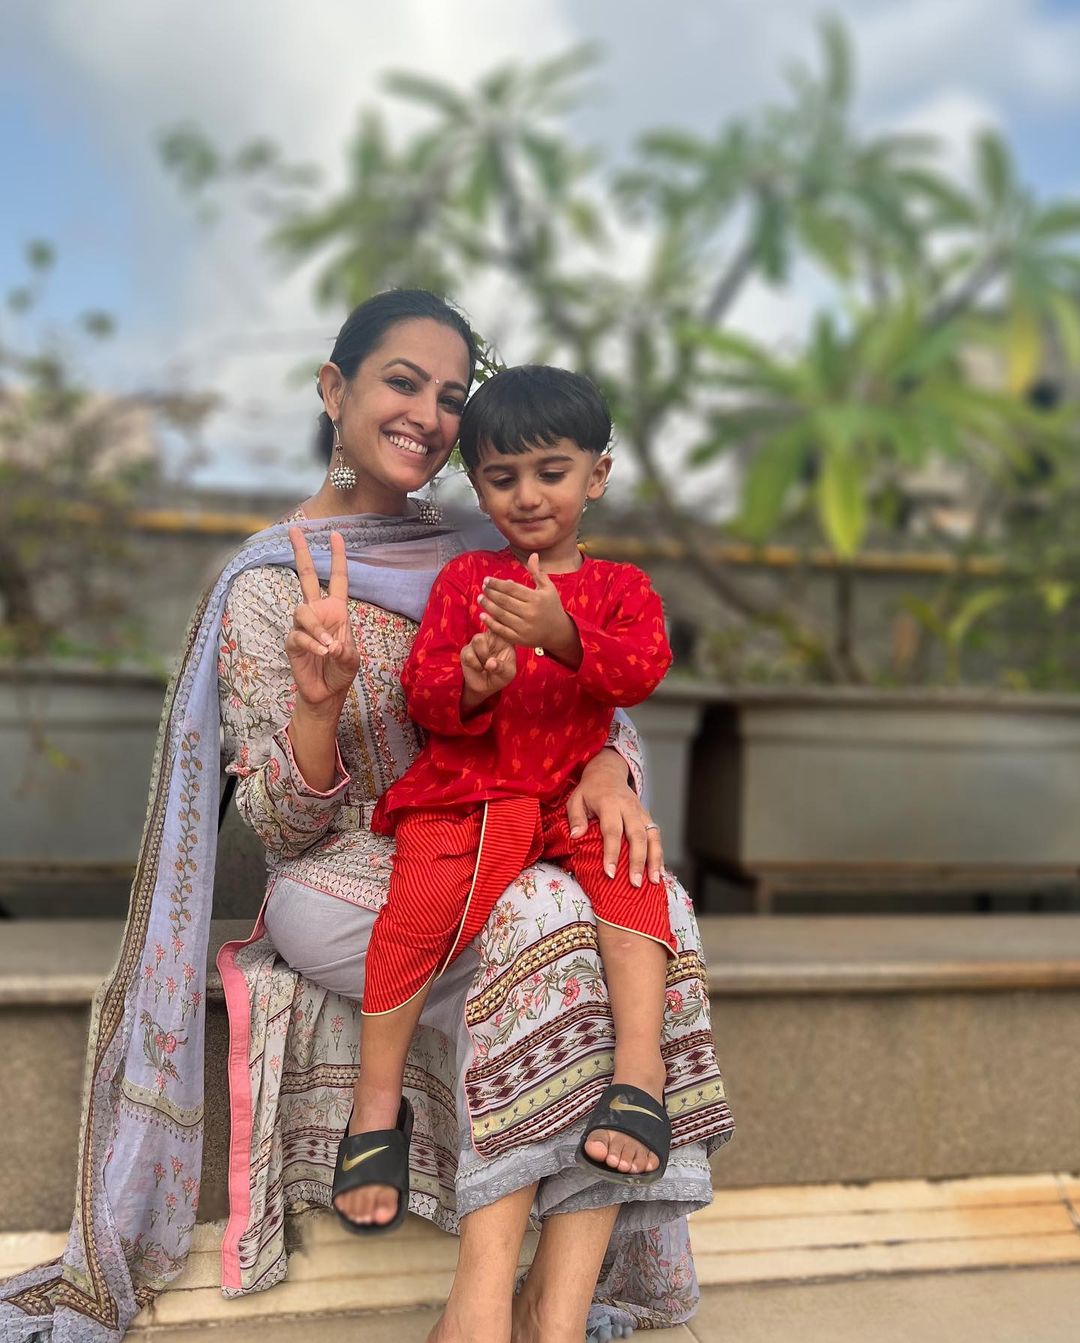 Actress Anita Hassanandani Shared A Video Of Her Son Who Cheers For The Indian Cricket Team. She Shared That He Was Already Got His Cricket Idol Sorted